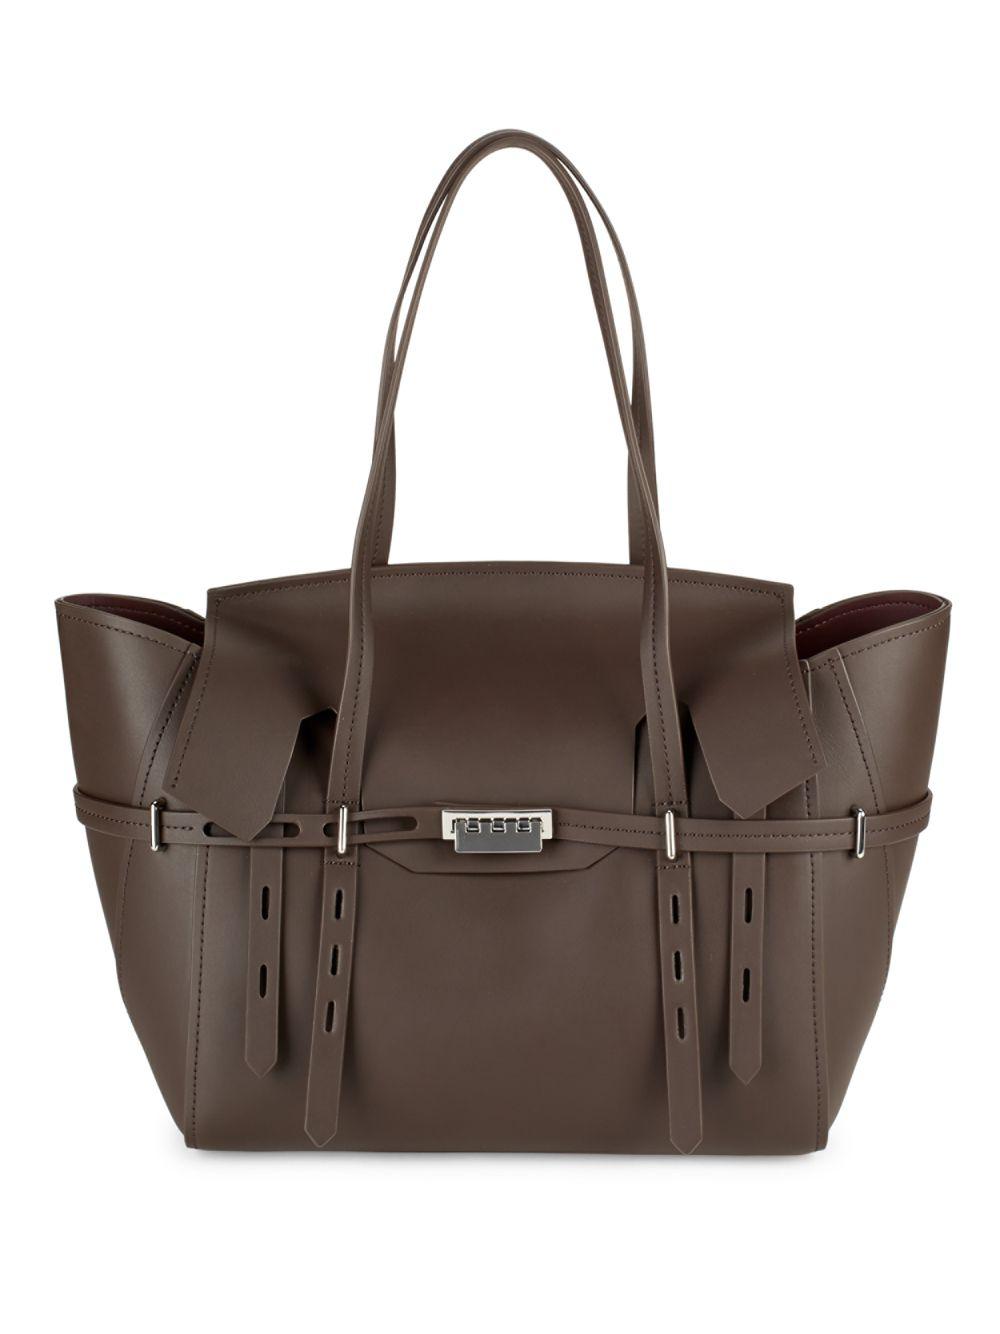 Zac Zac Posen Winged Leather Tote in Dark Brown (Brown) - Lyst